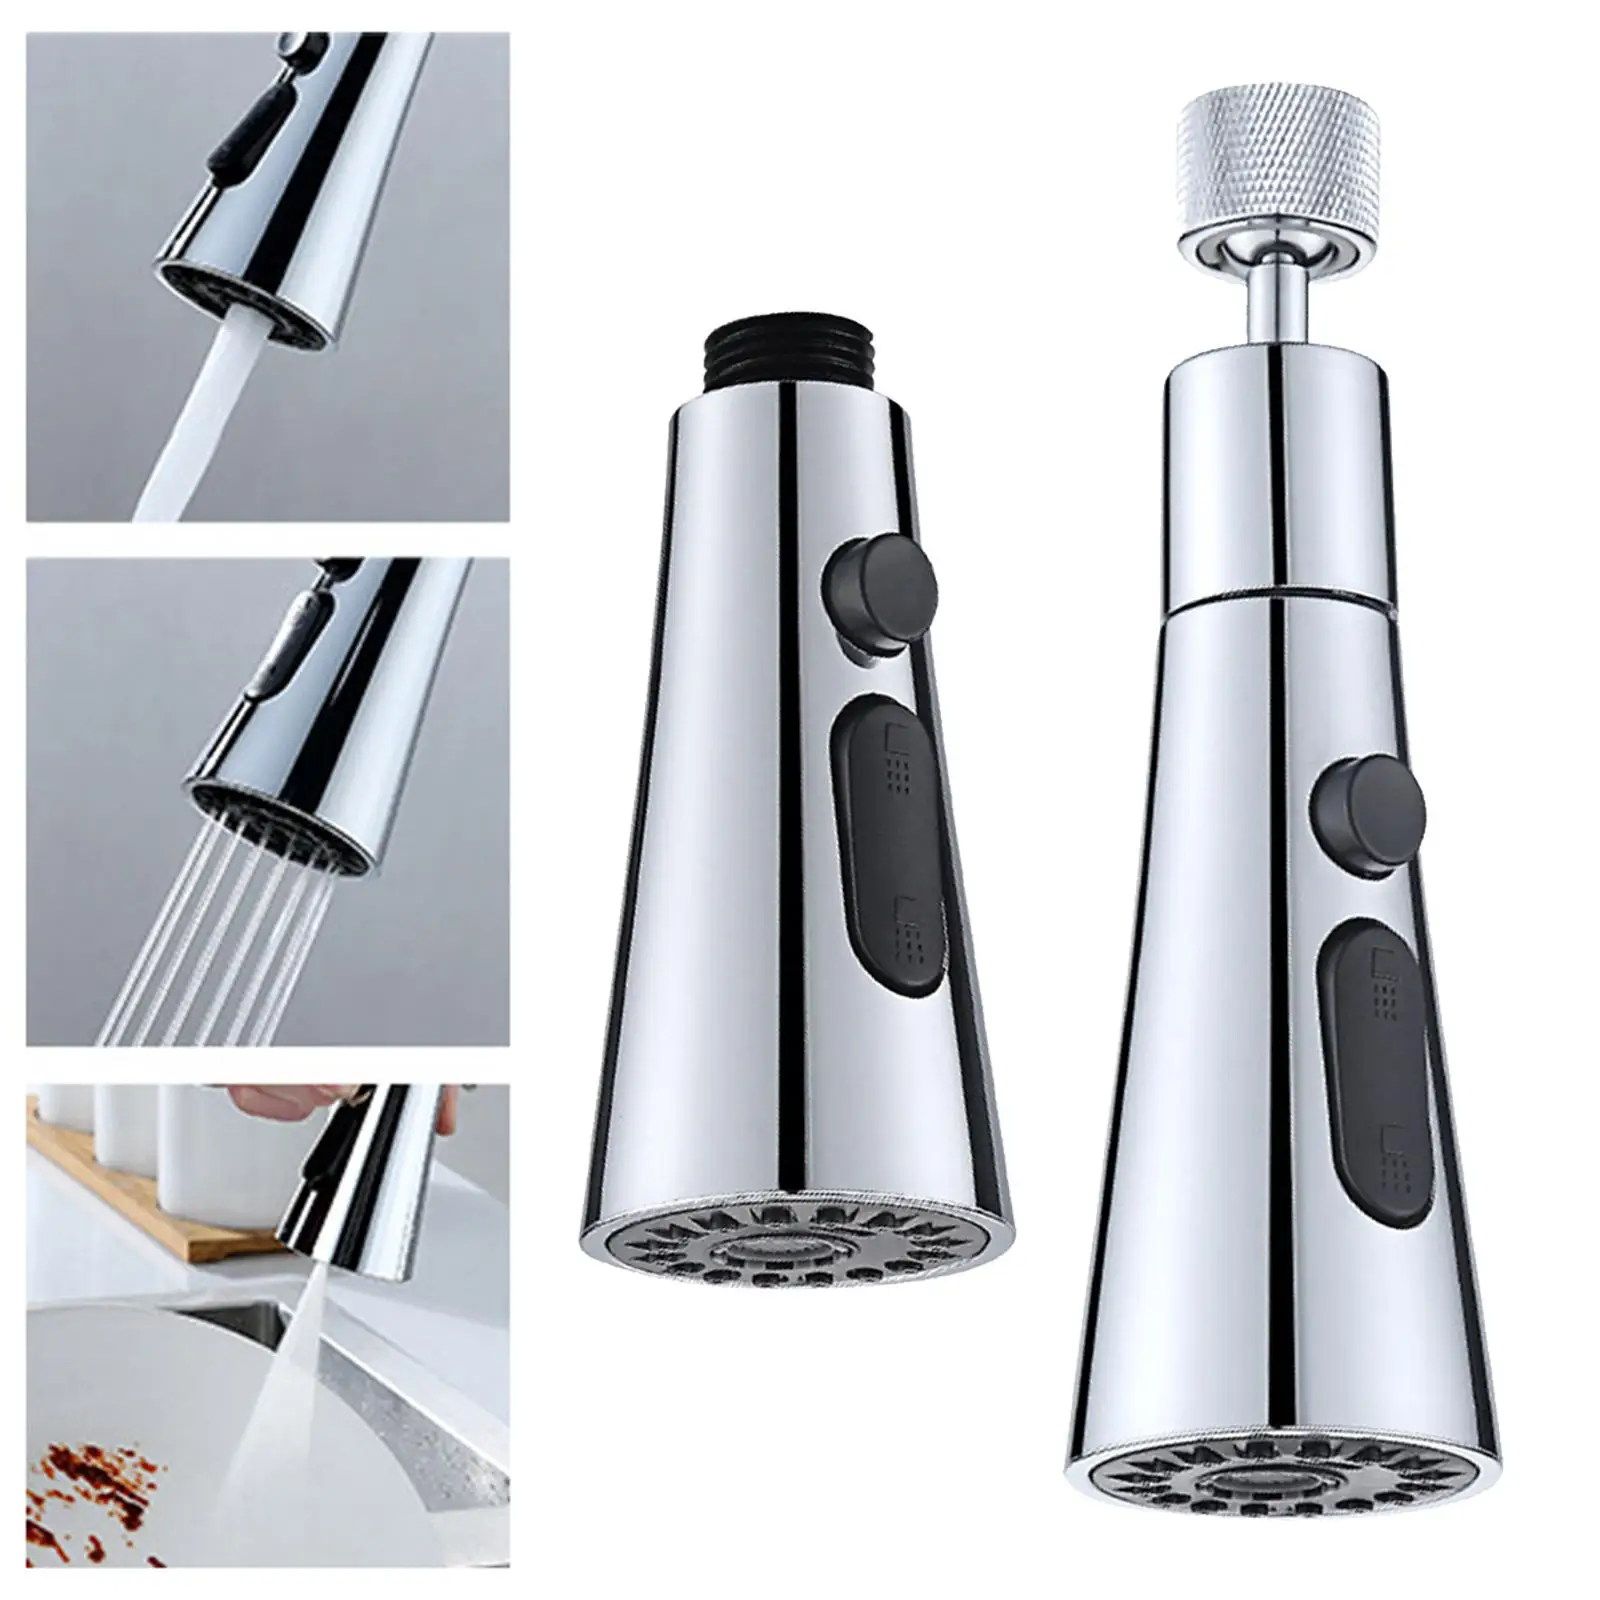 360 Degree Swivel Faucet Sprayer Attachment Sink Aerators Kitchen Sink Faucet Kitchen Sink Accessories for Kitchen Bathroom Home